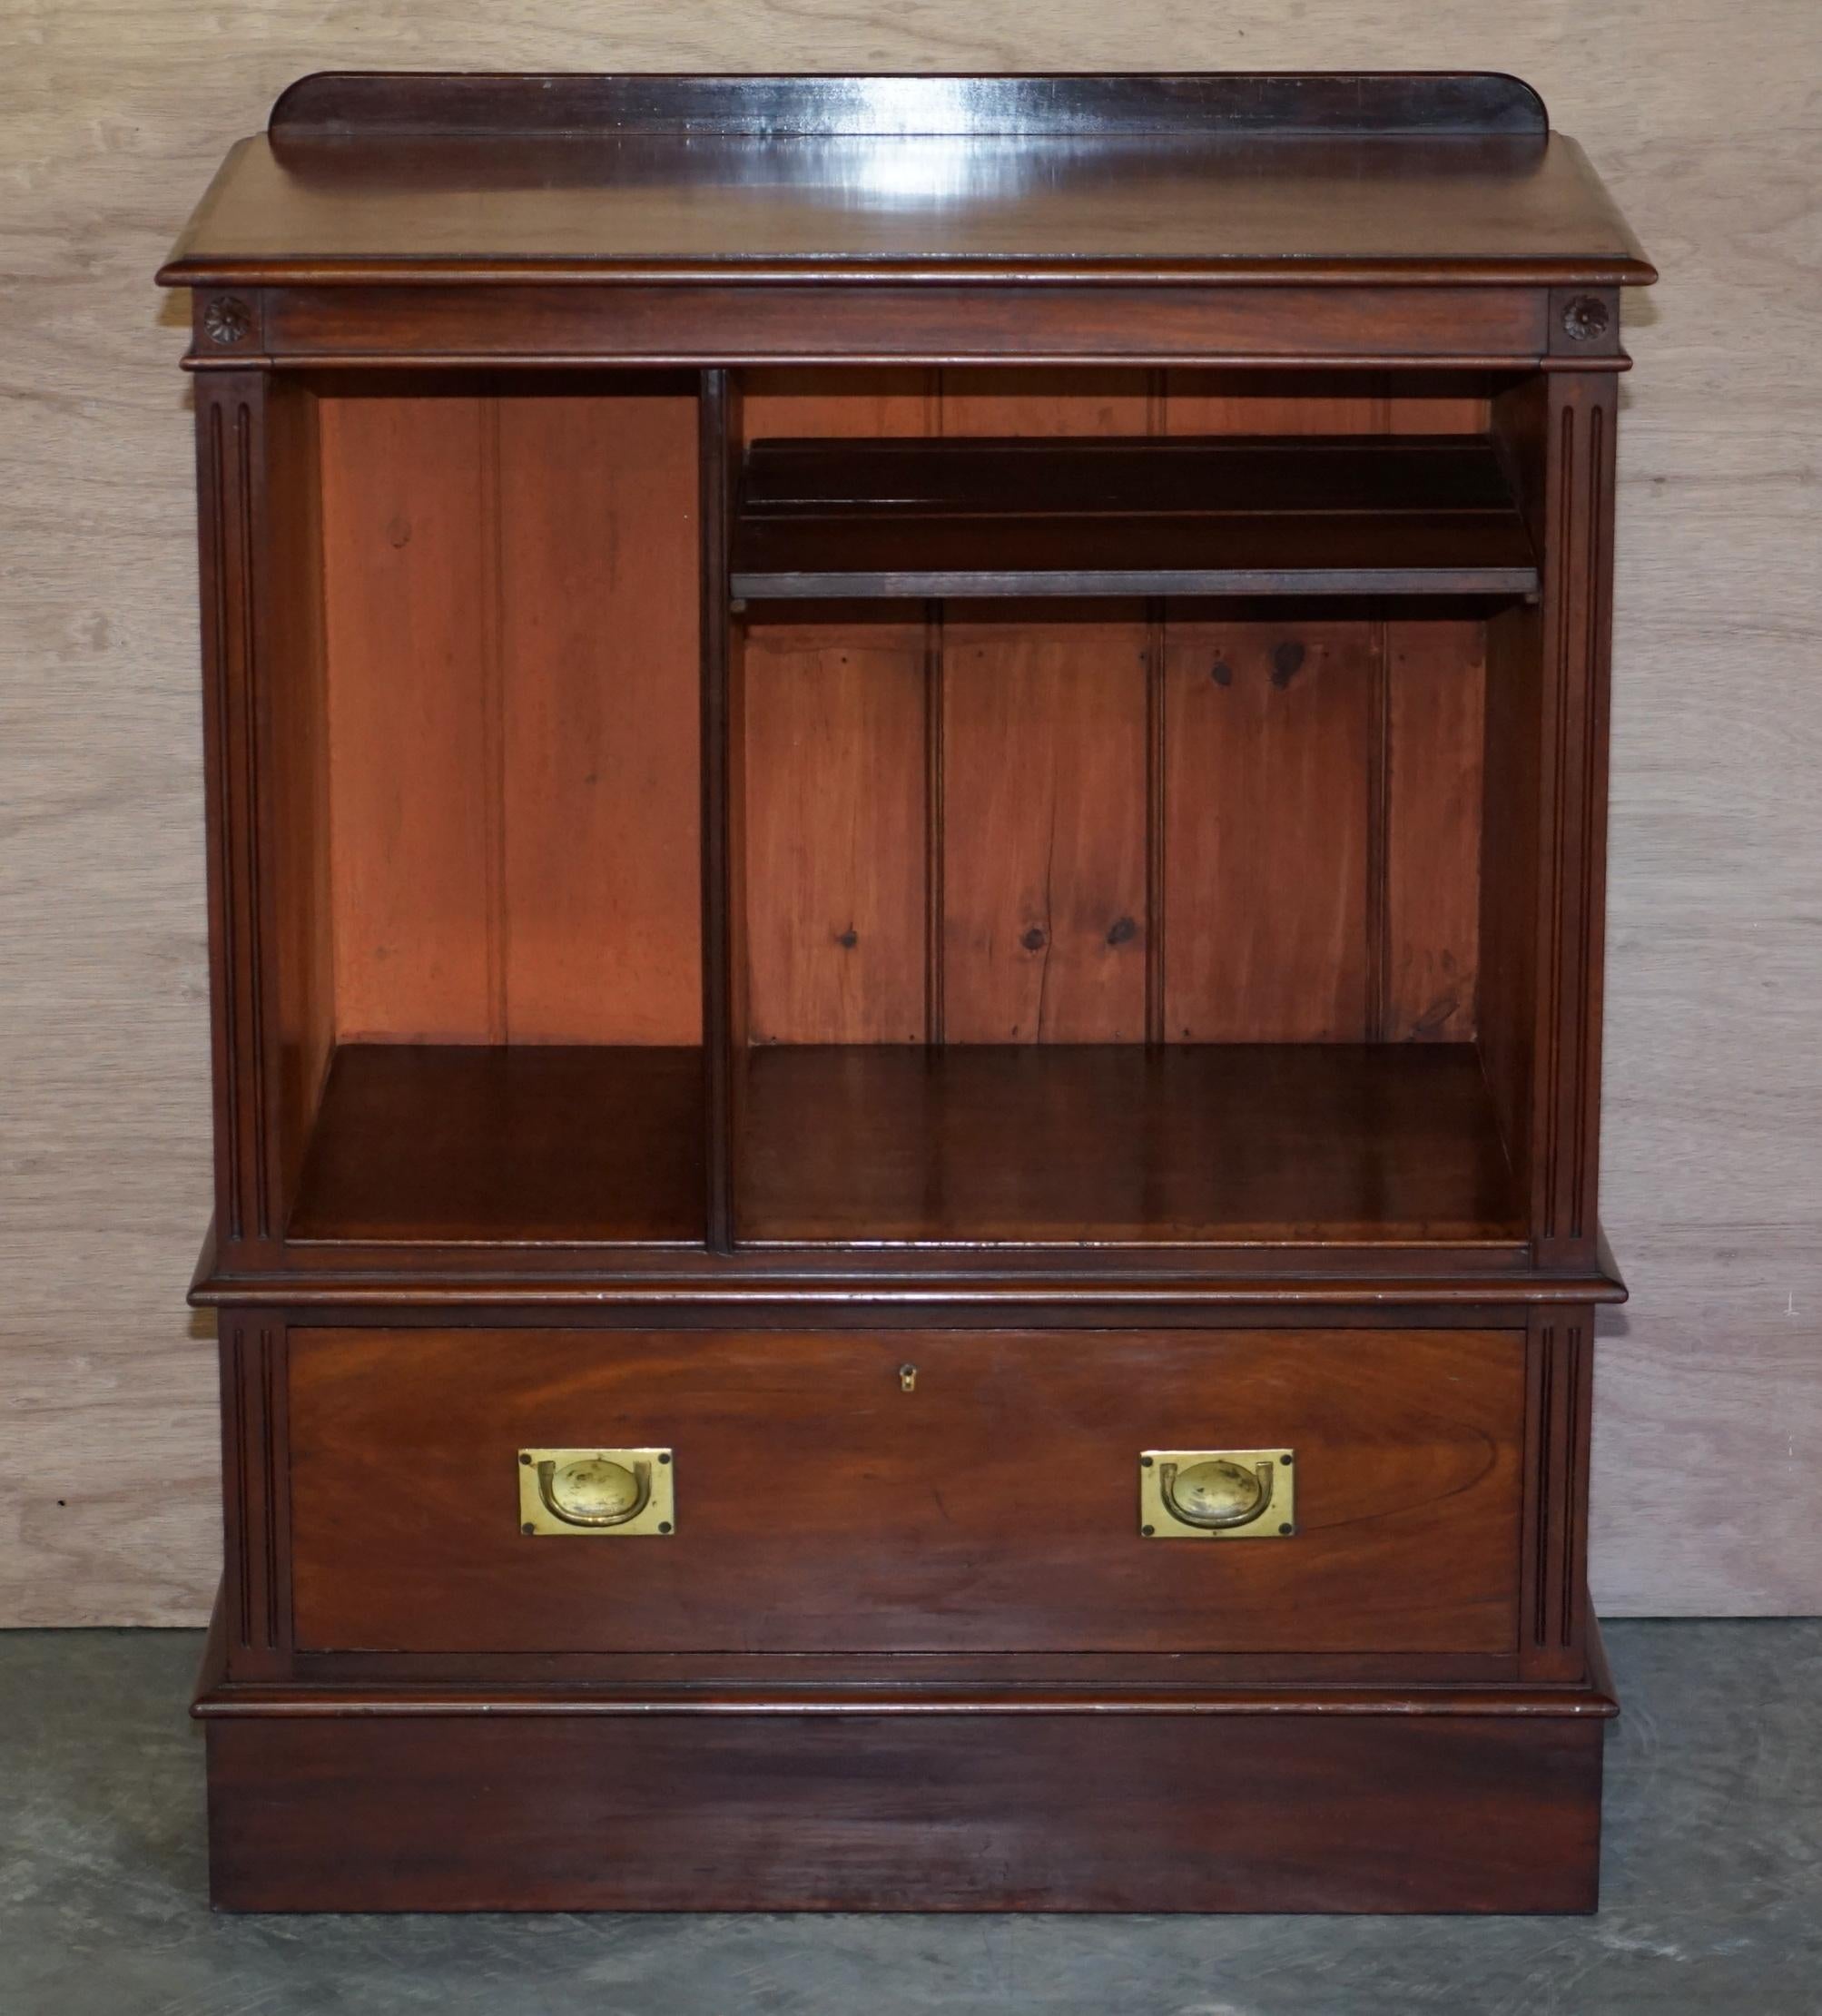 We are delighted to offer for sale this stunning antique Victorian rich mahogany Military Campaign drinks cabinet which can be used as a media entertainment sideboard

A very good looking well made and decorative piece, it has a tall side section